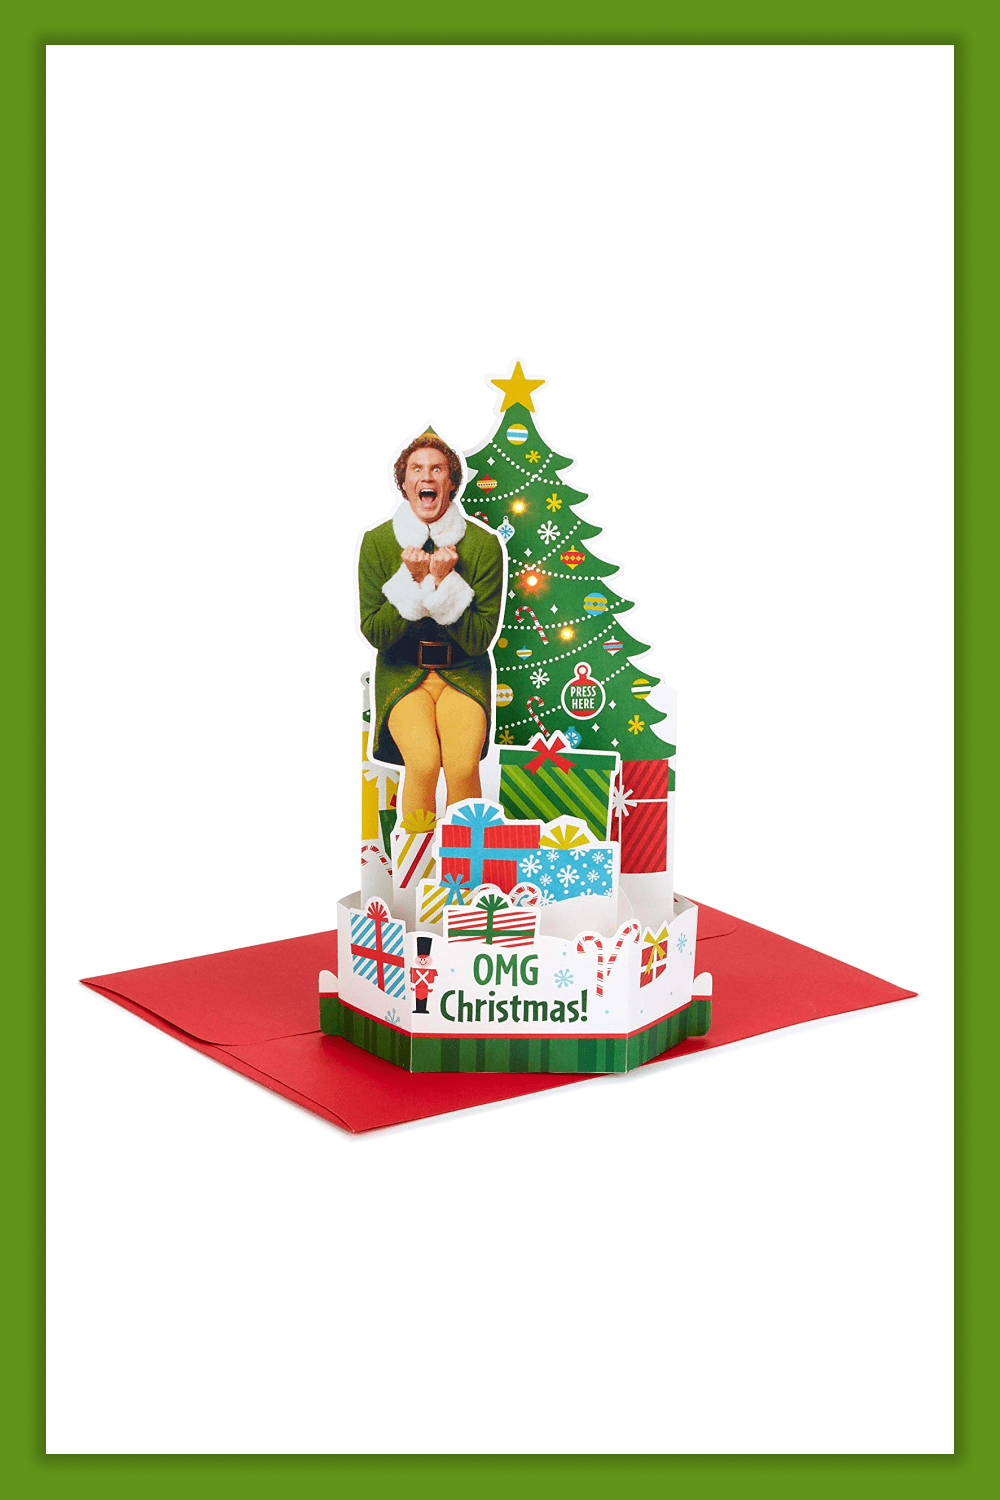 Christmas card with happy Buddy the Elf and Christmas tree.